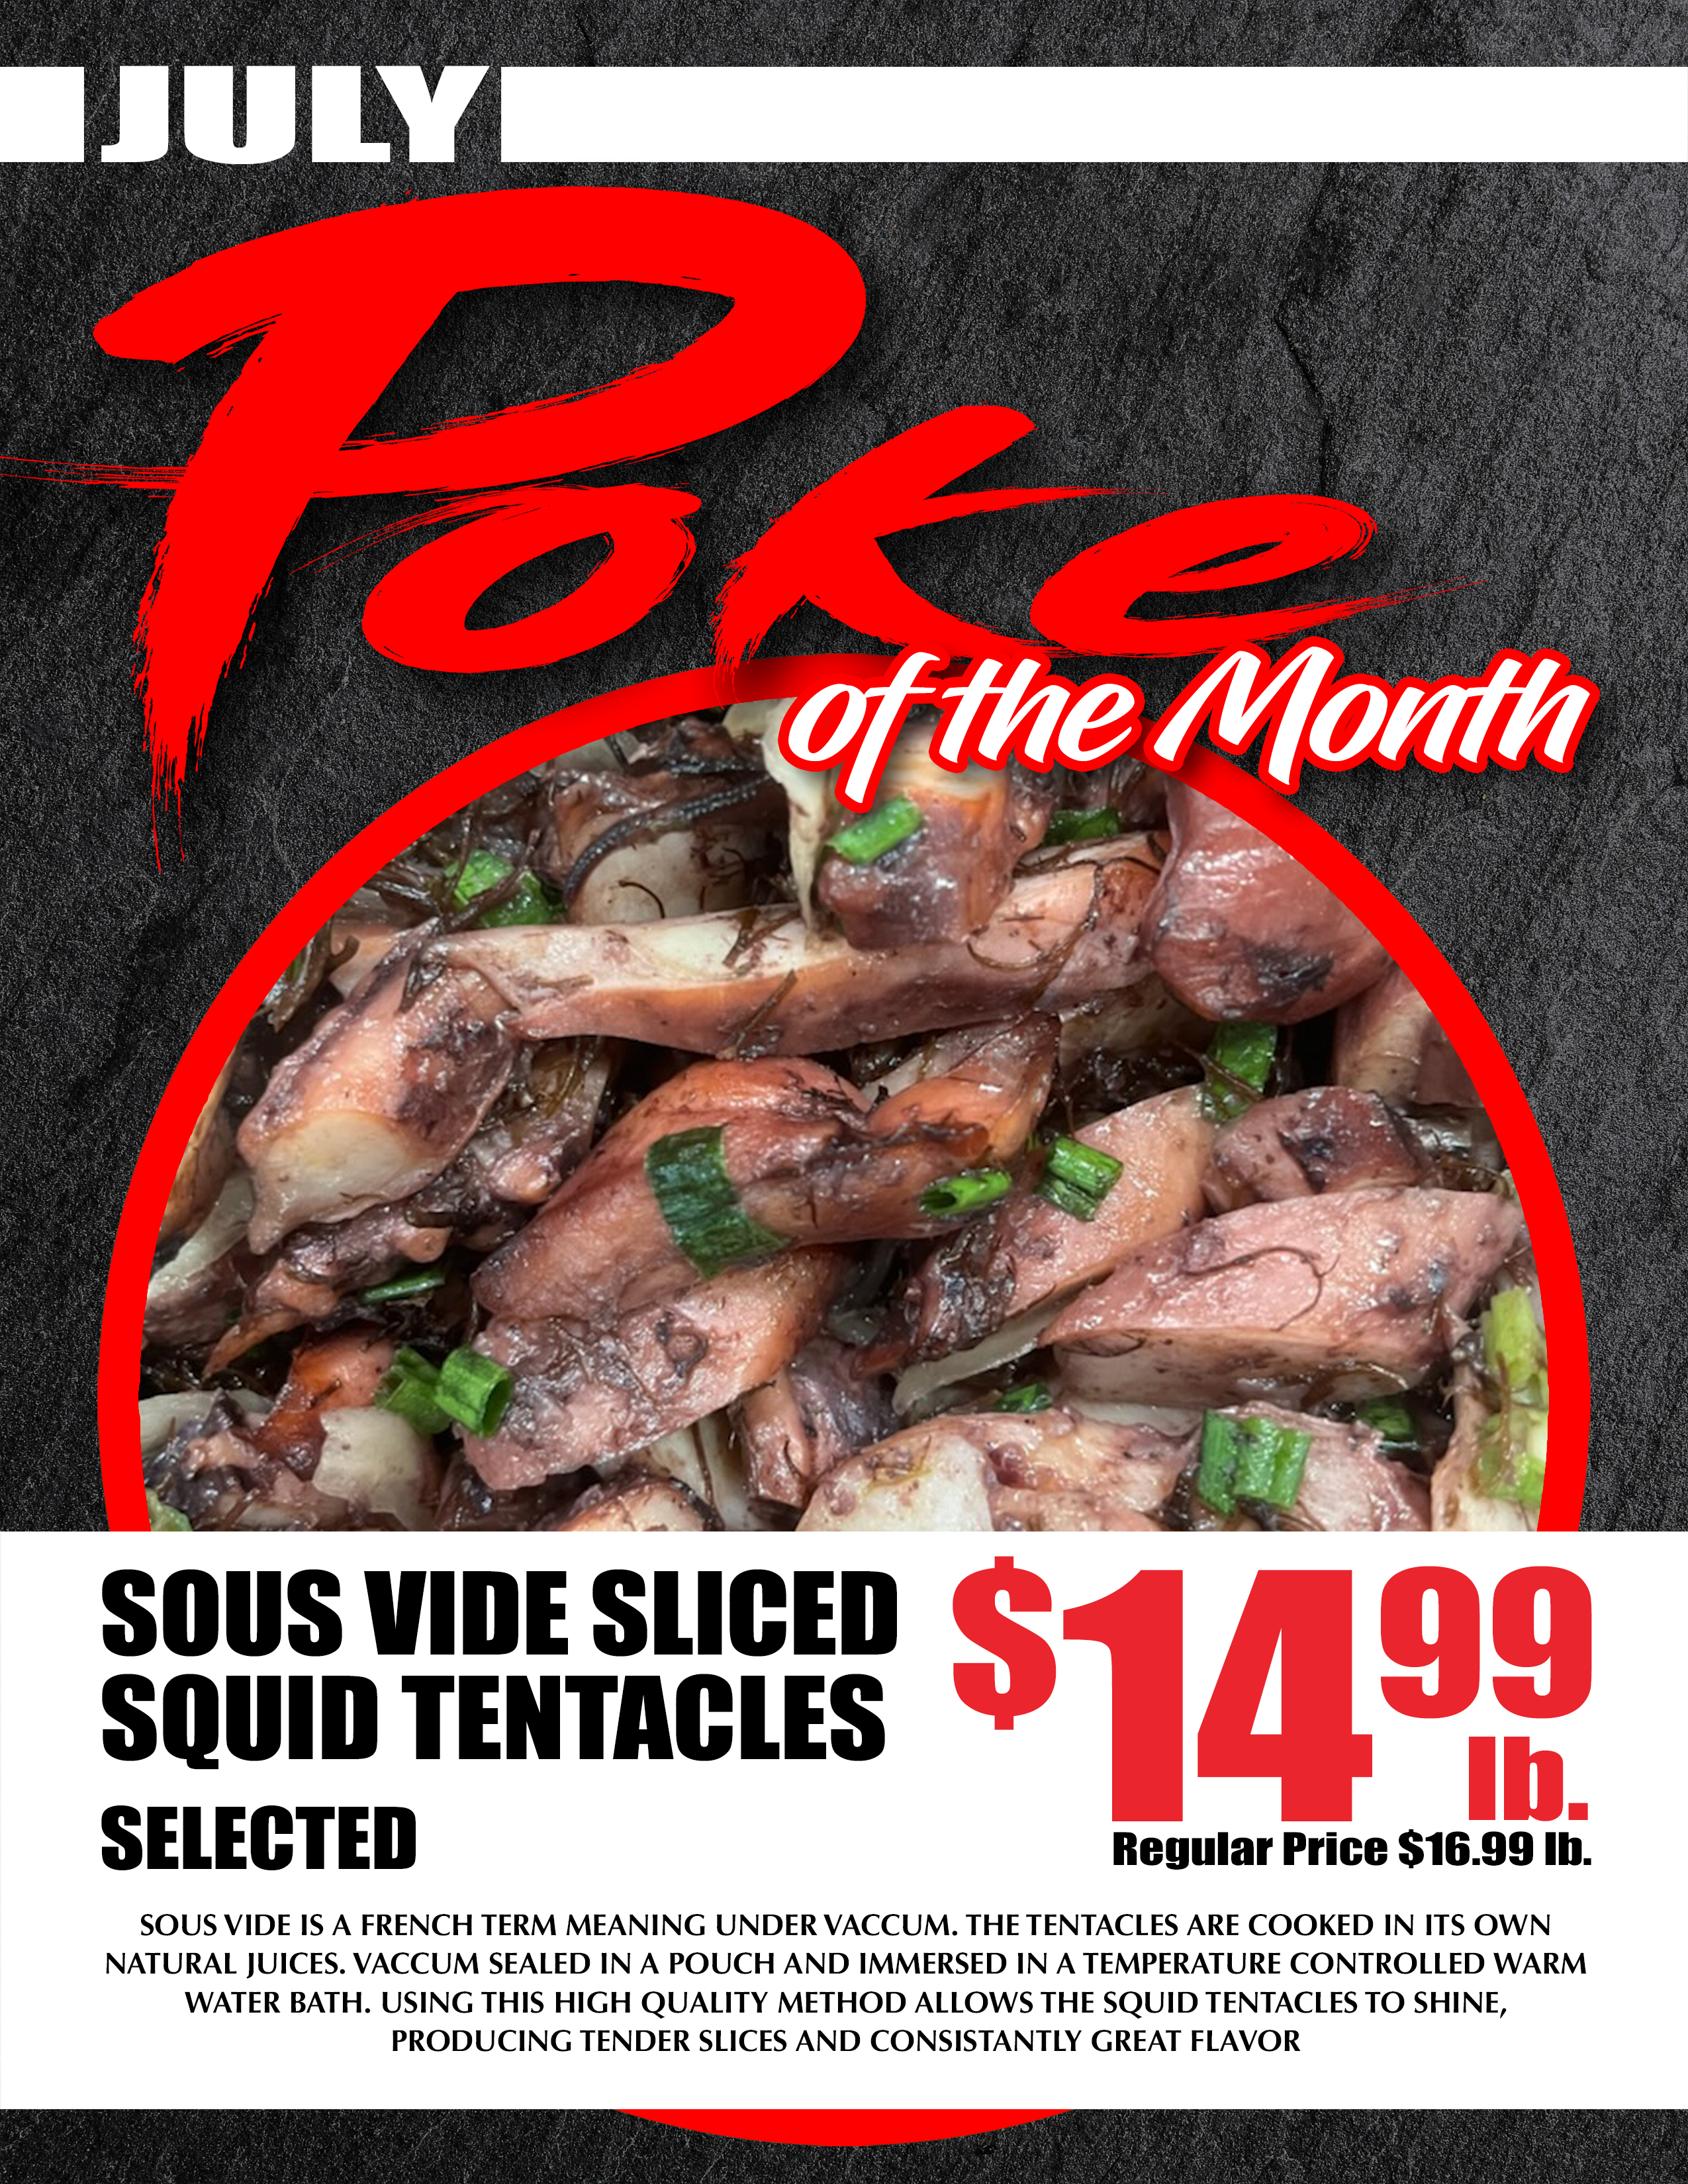 Poke of the month